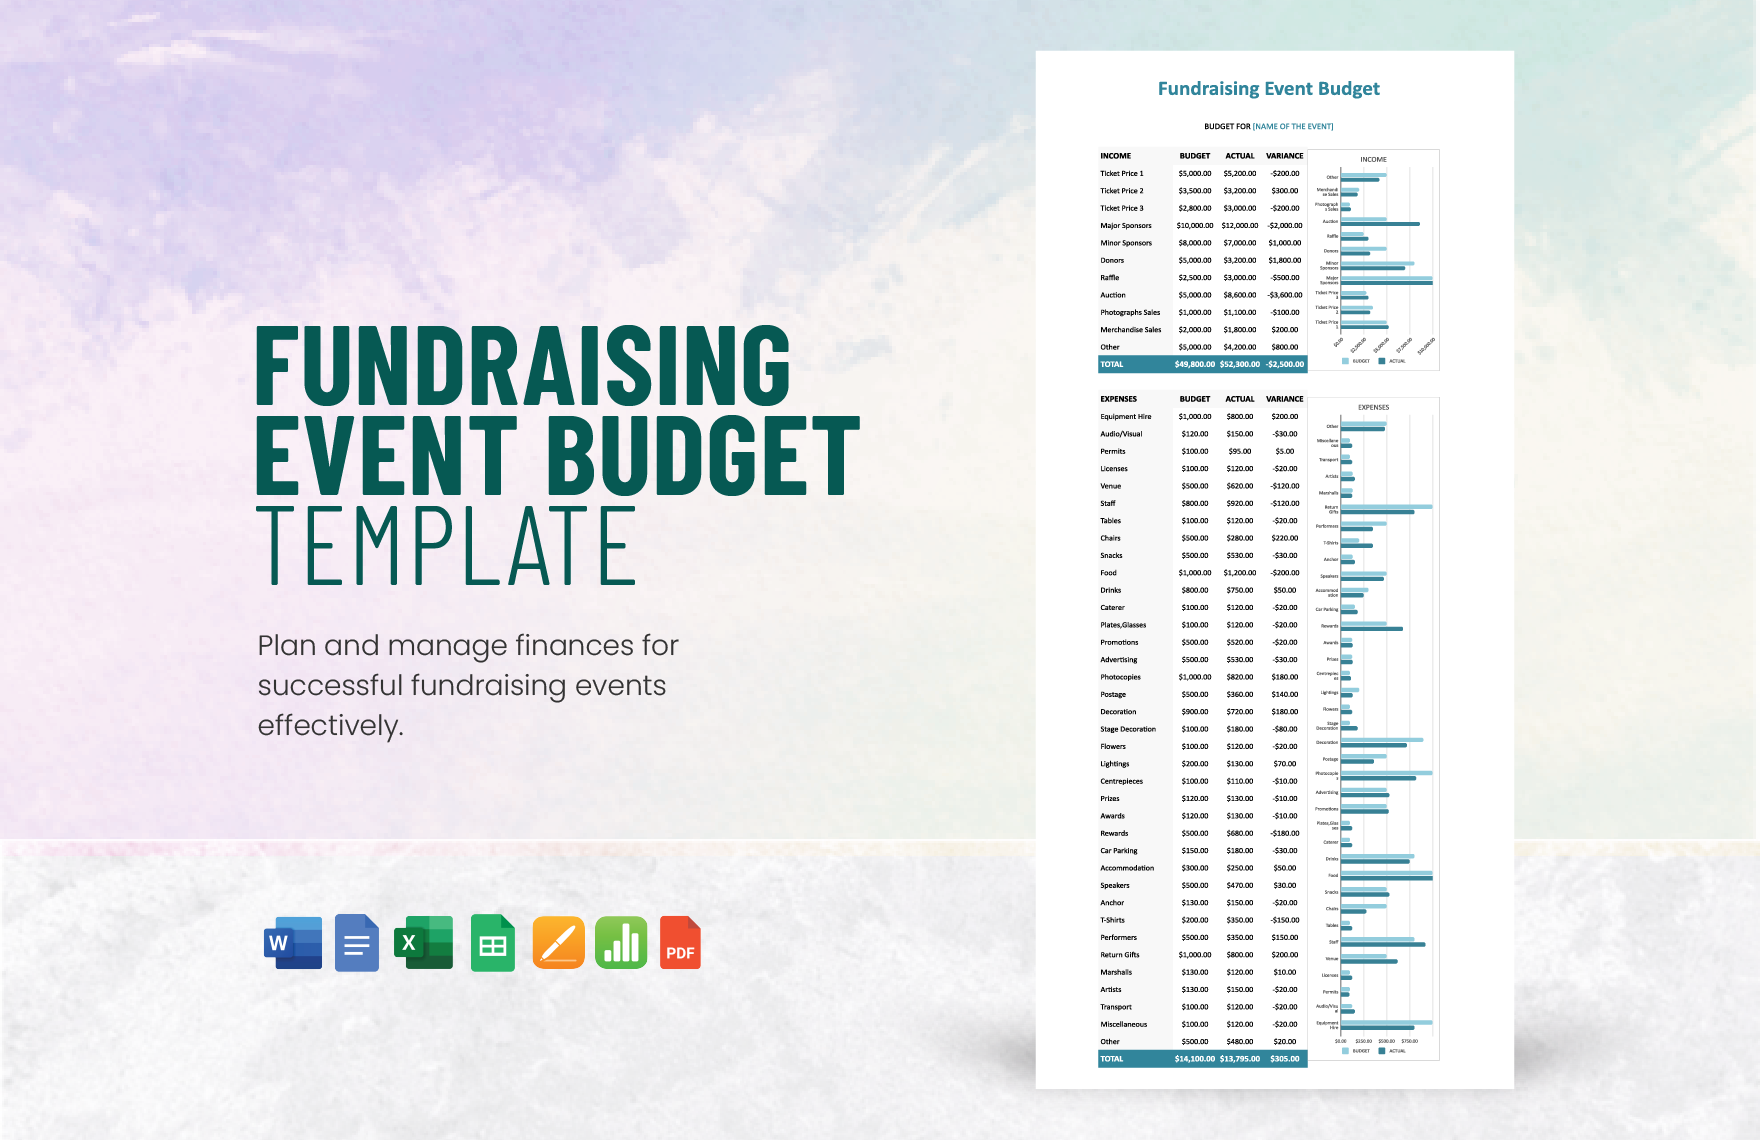 Fundraising Event Budget Template in Word, Google Docs, Excel, PDF, Google Sheets, Apple Pages, Apple Numbers